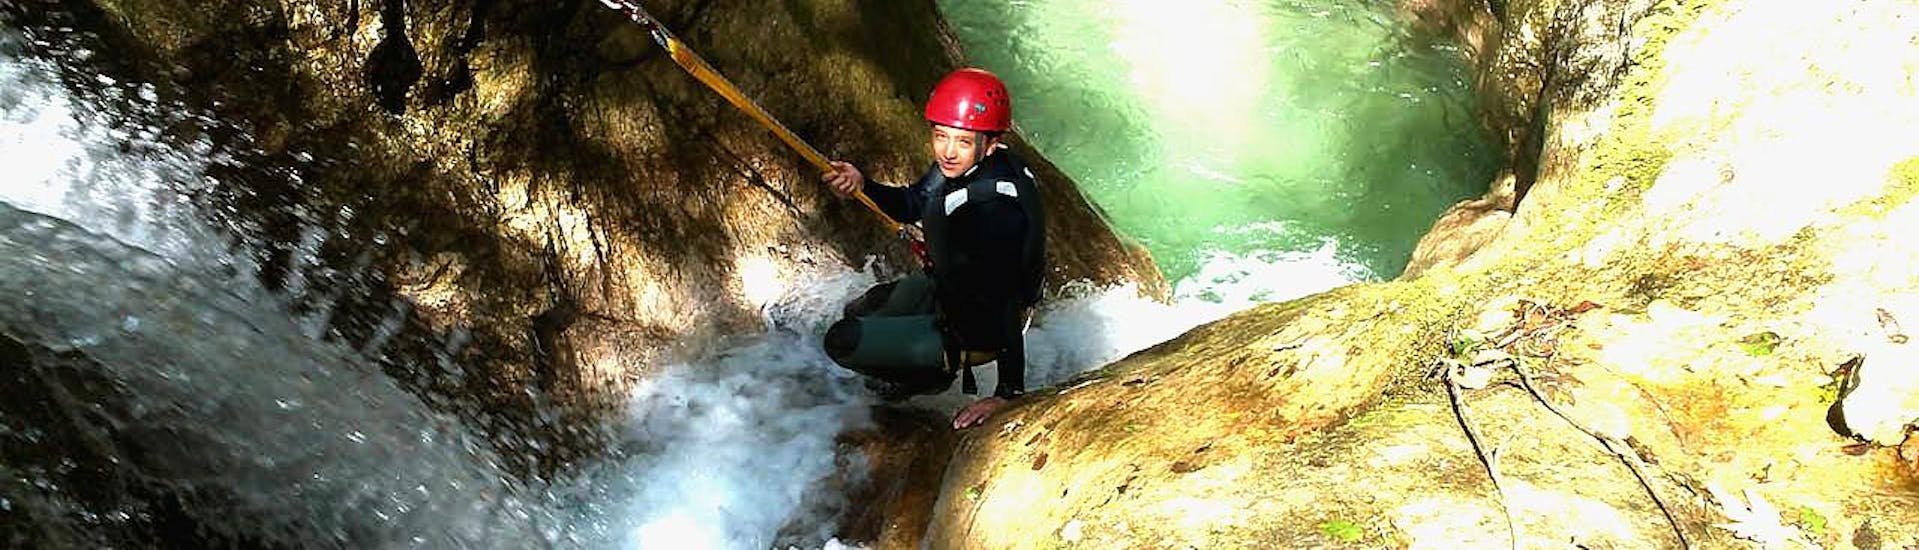 Canyoning für Anfänger im Palvico in Pieve di Ledro.